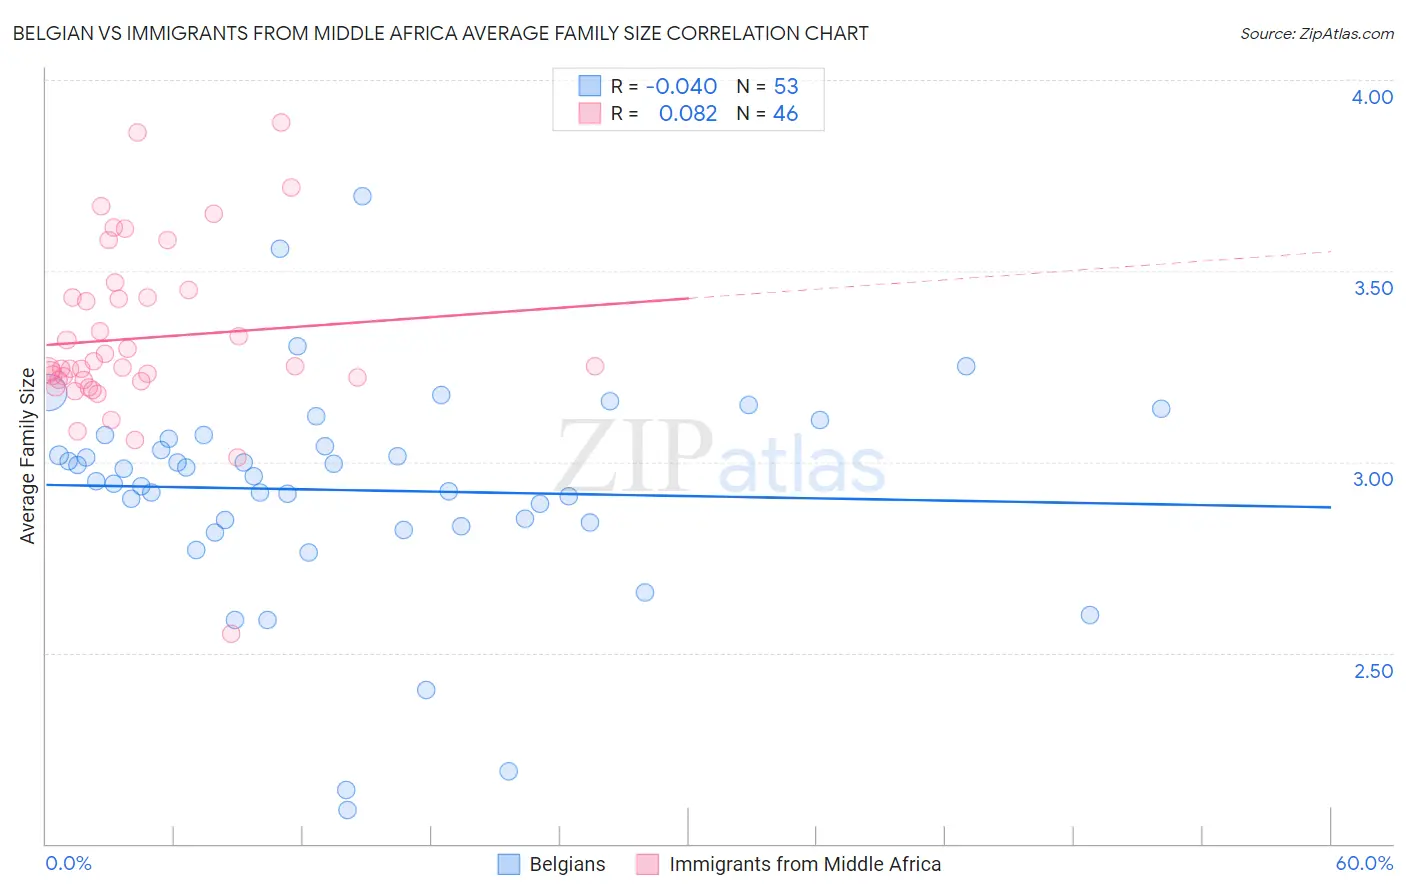 Belgian vs Immigrants from Middle Africa Average Family Size